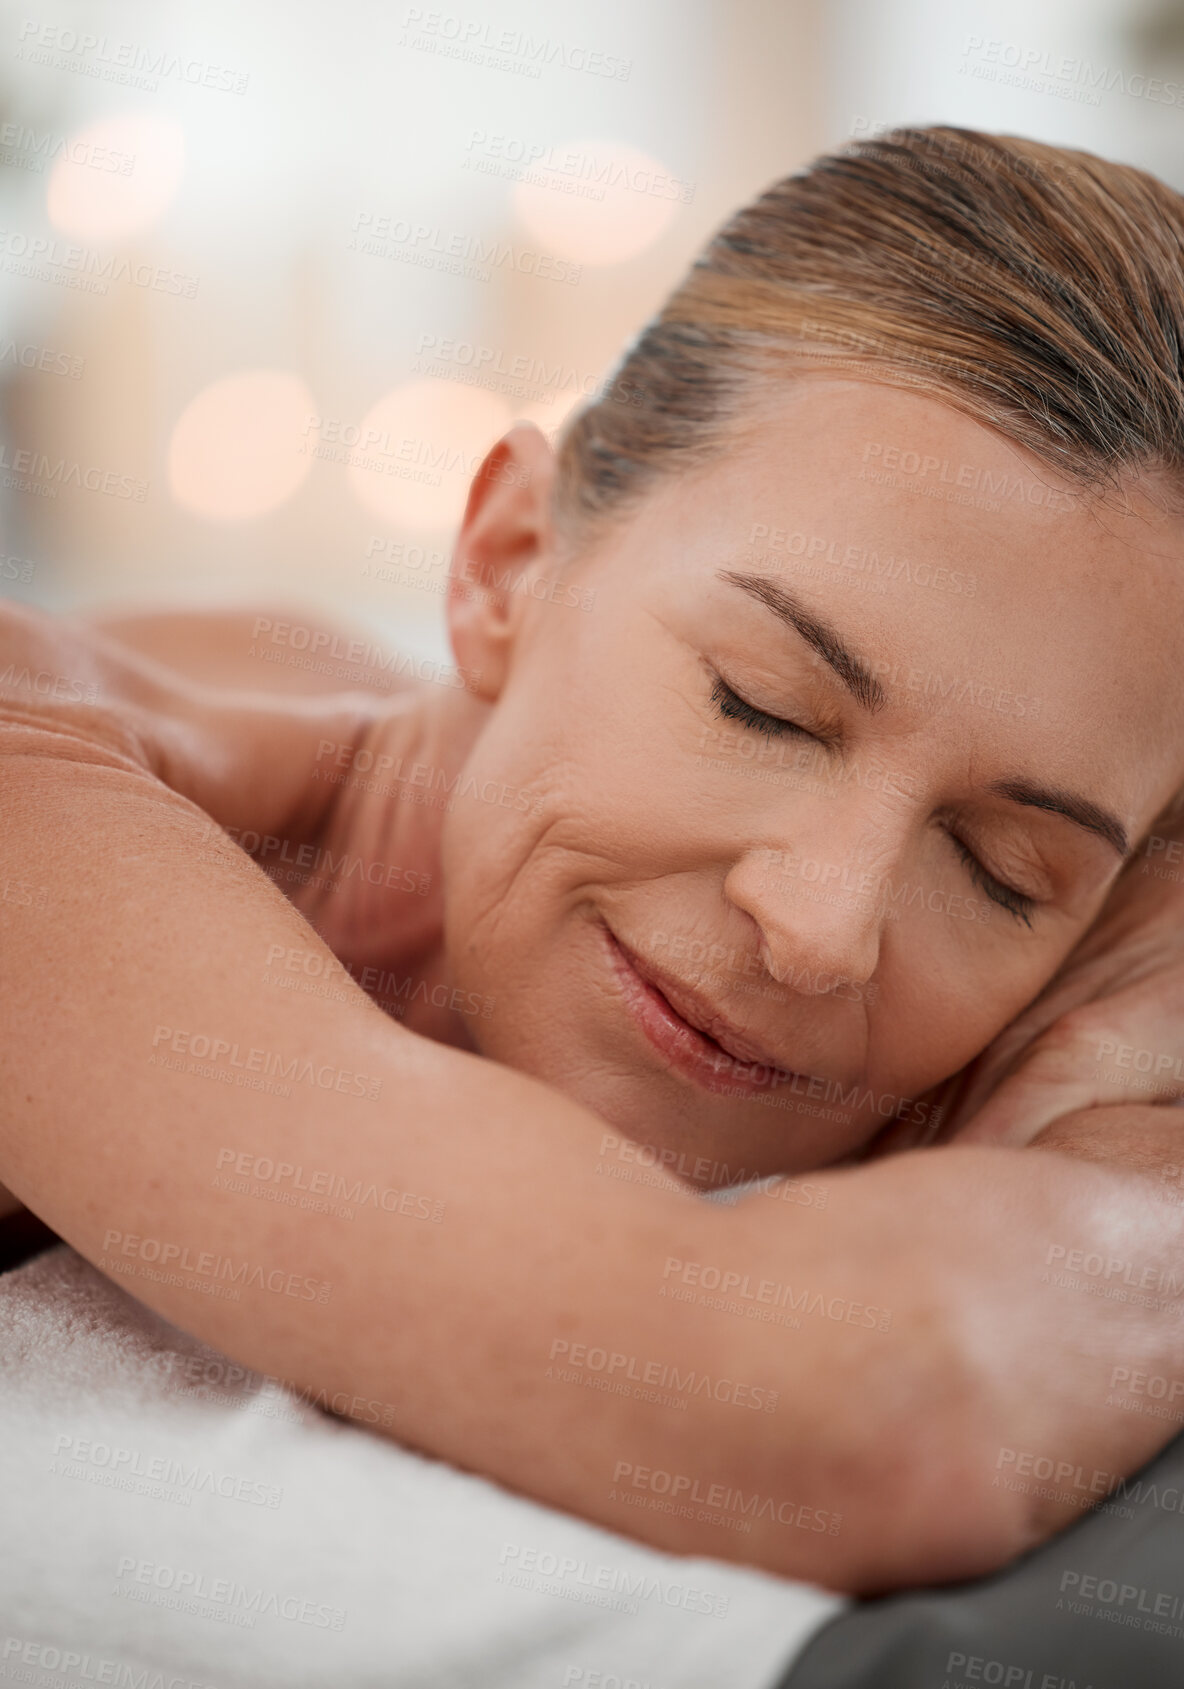 Buy stock photo Shot of a mature woman resting in between spa treatments